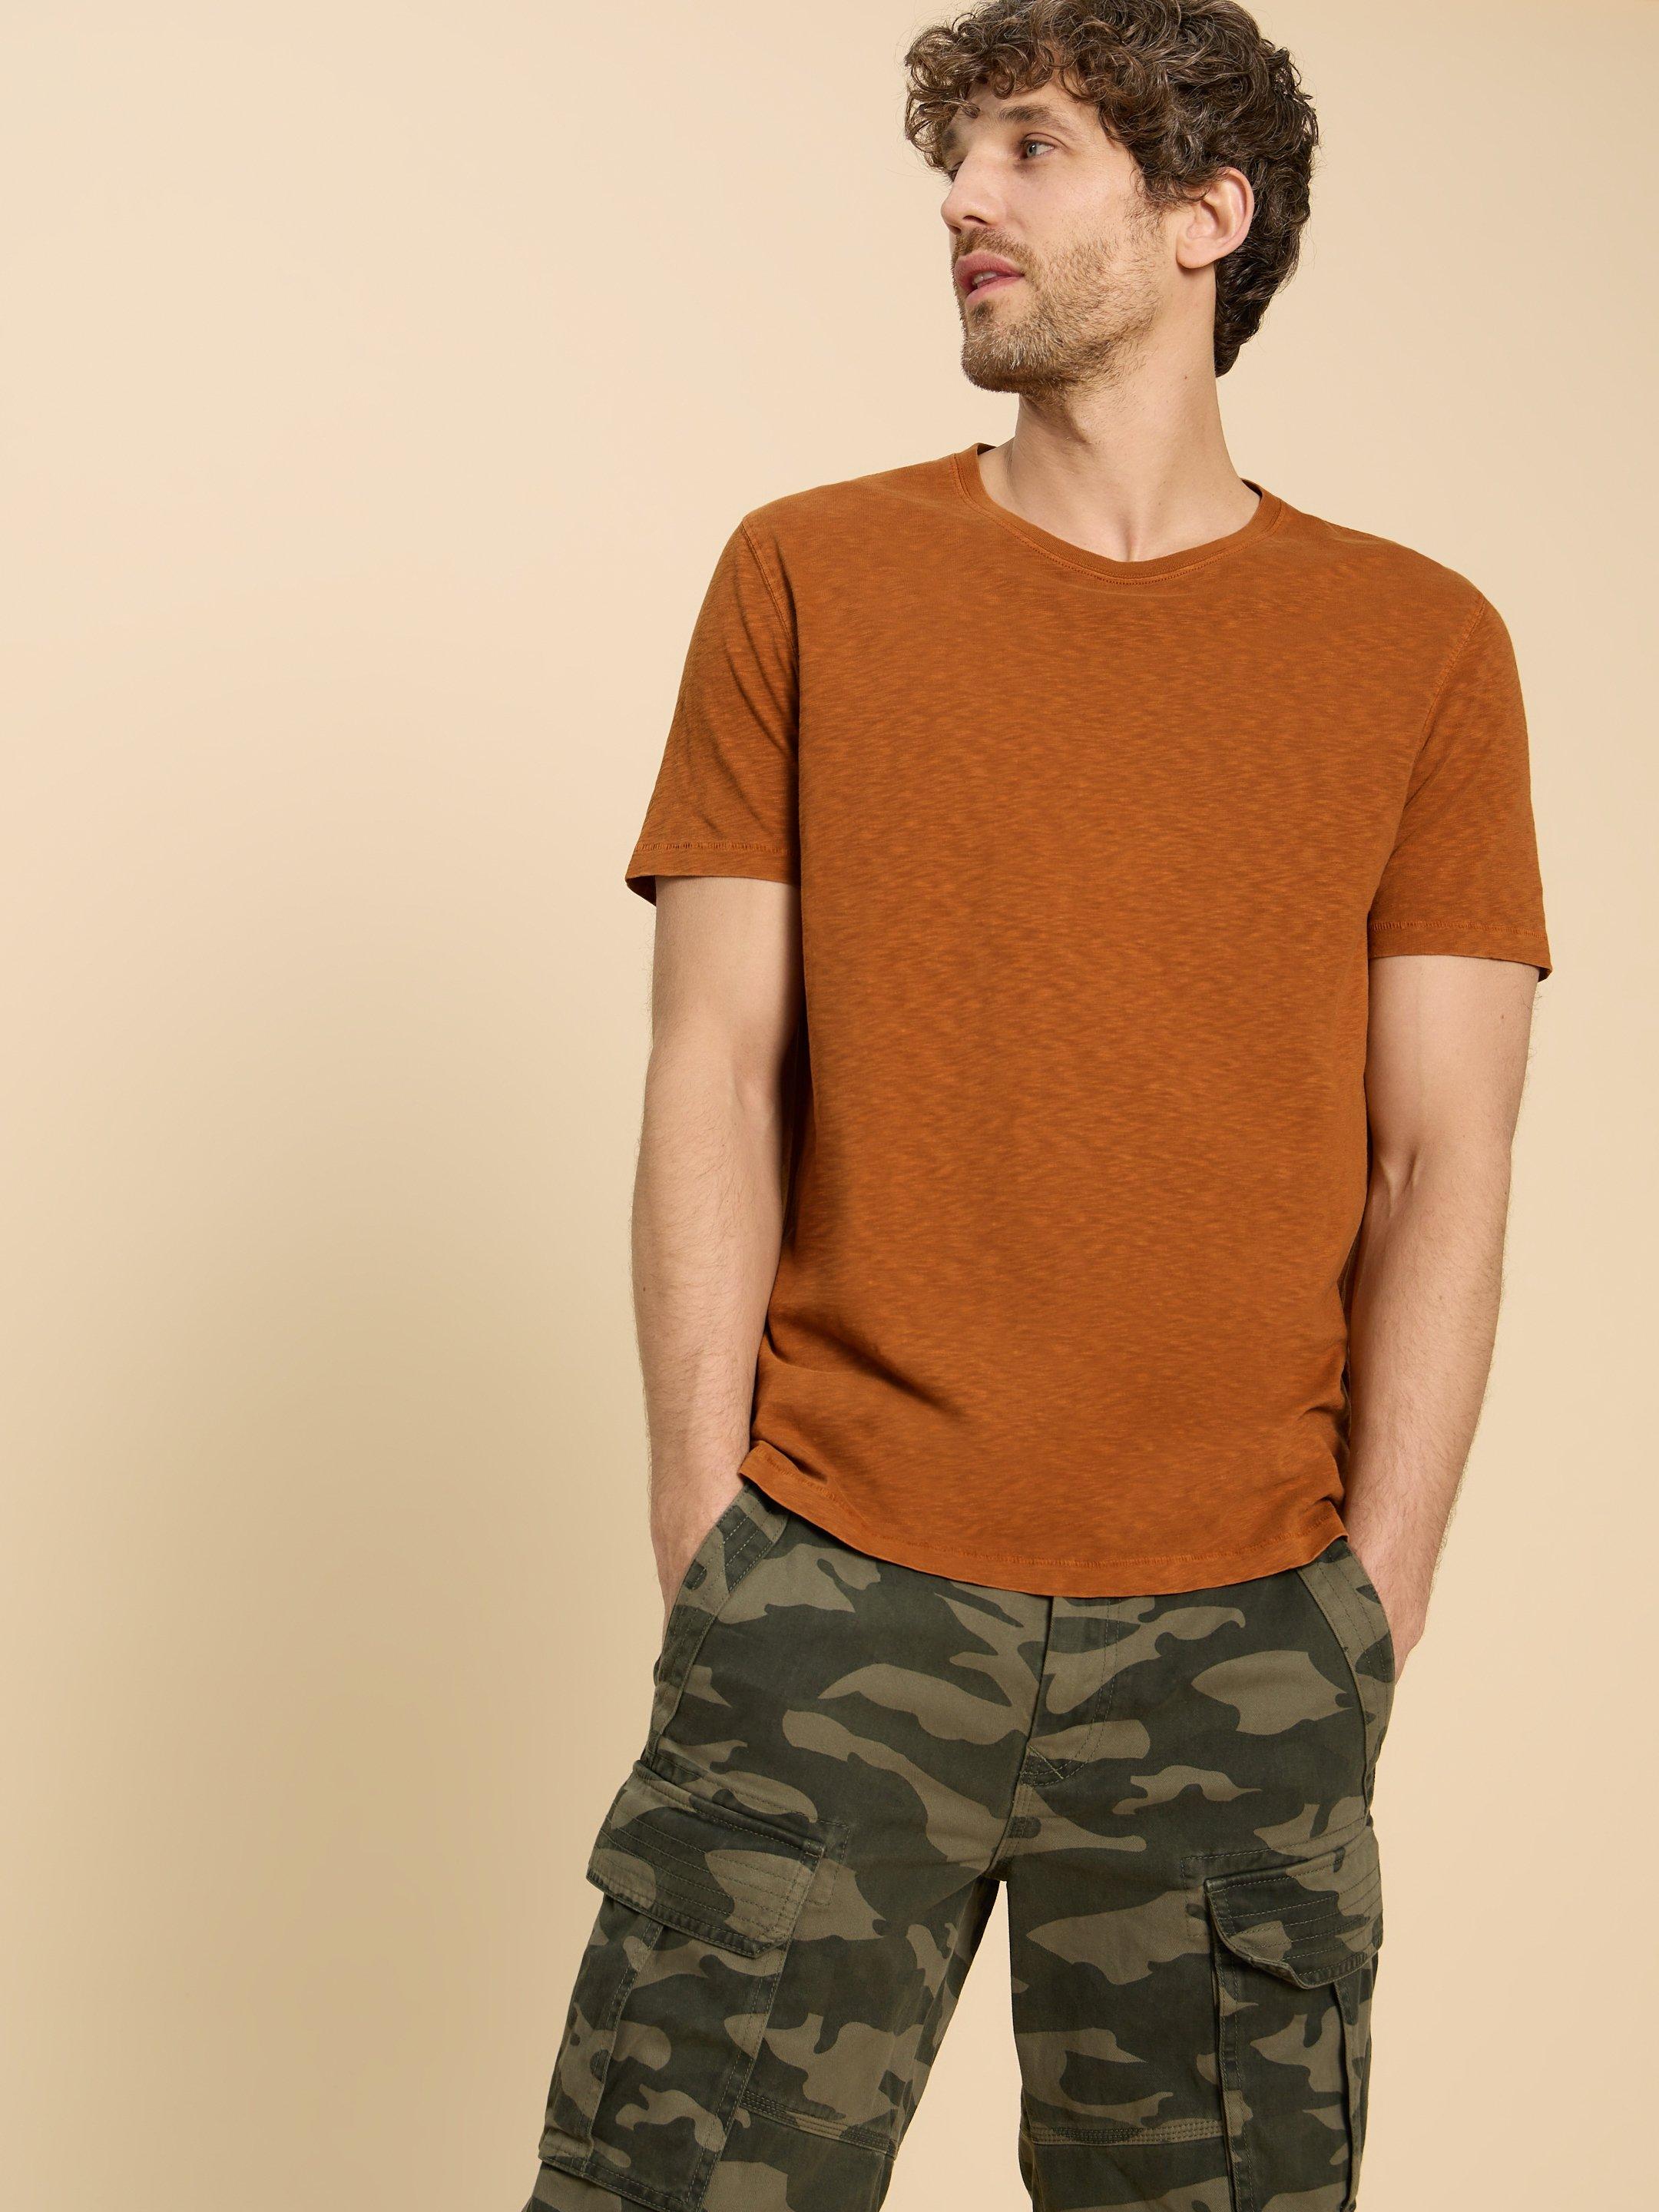 Abersoch Short Sleeve Tee in MID TAN - LIFESTYLE